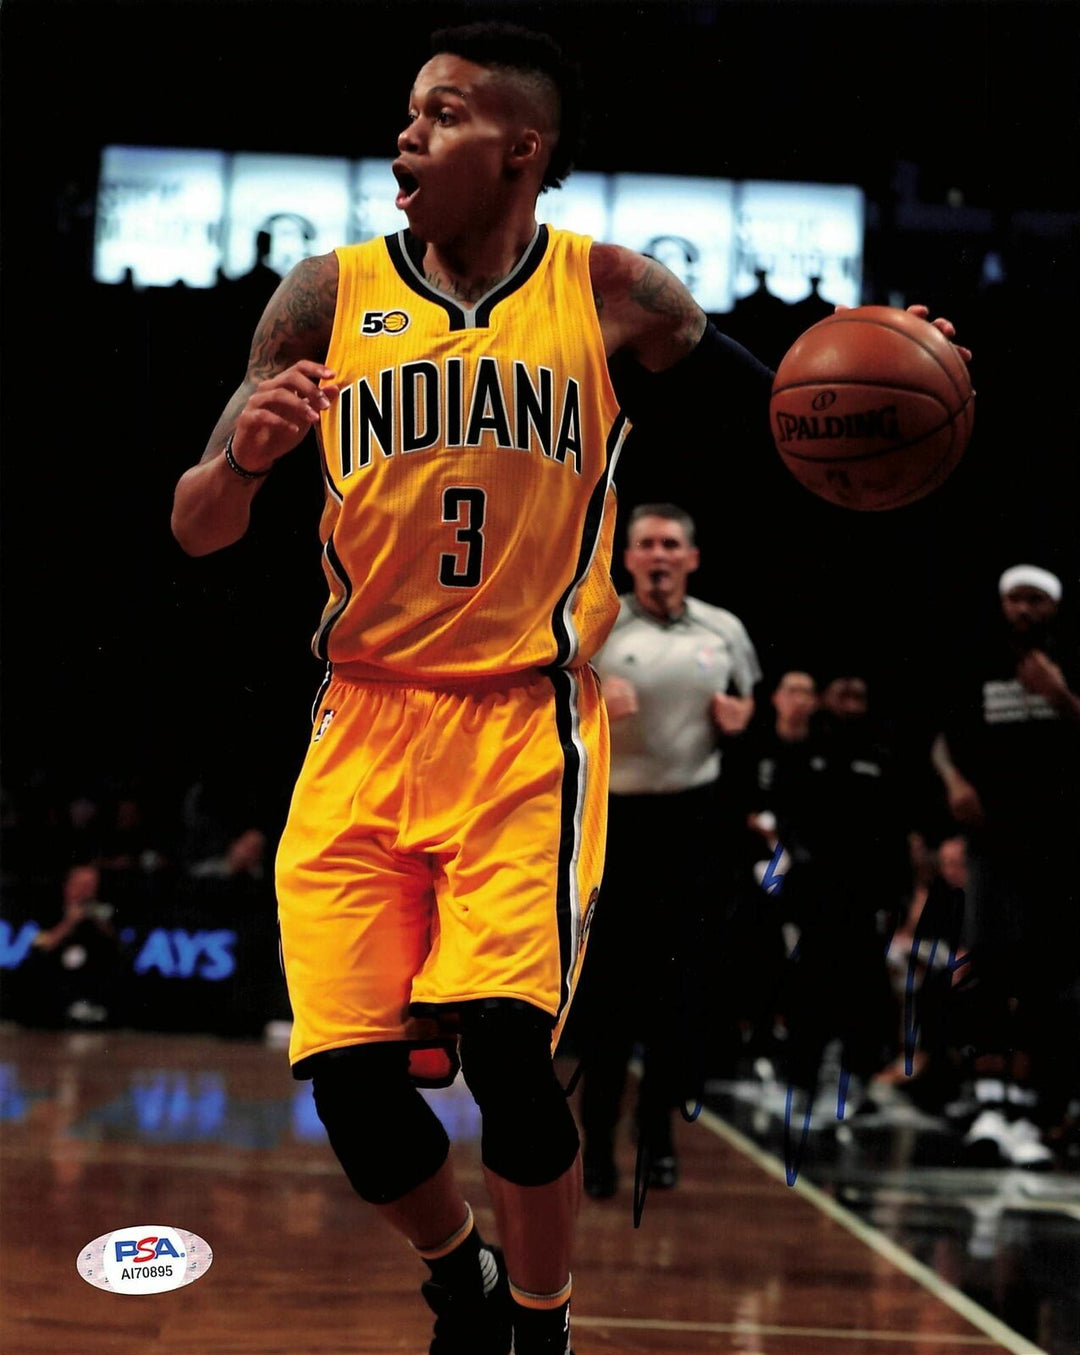 JOE YOUNG Signed 8x10 photo PSA/DNA Indiana Pacers Autographed Image 1